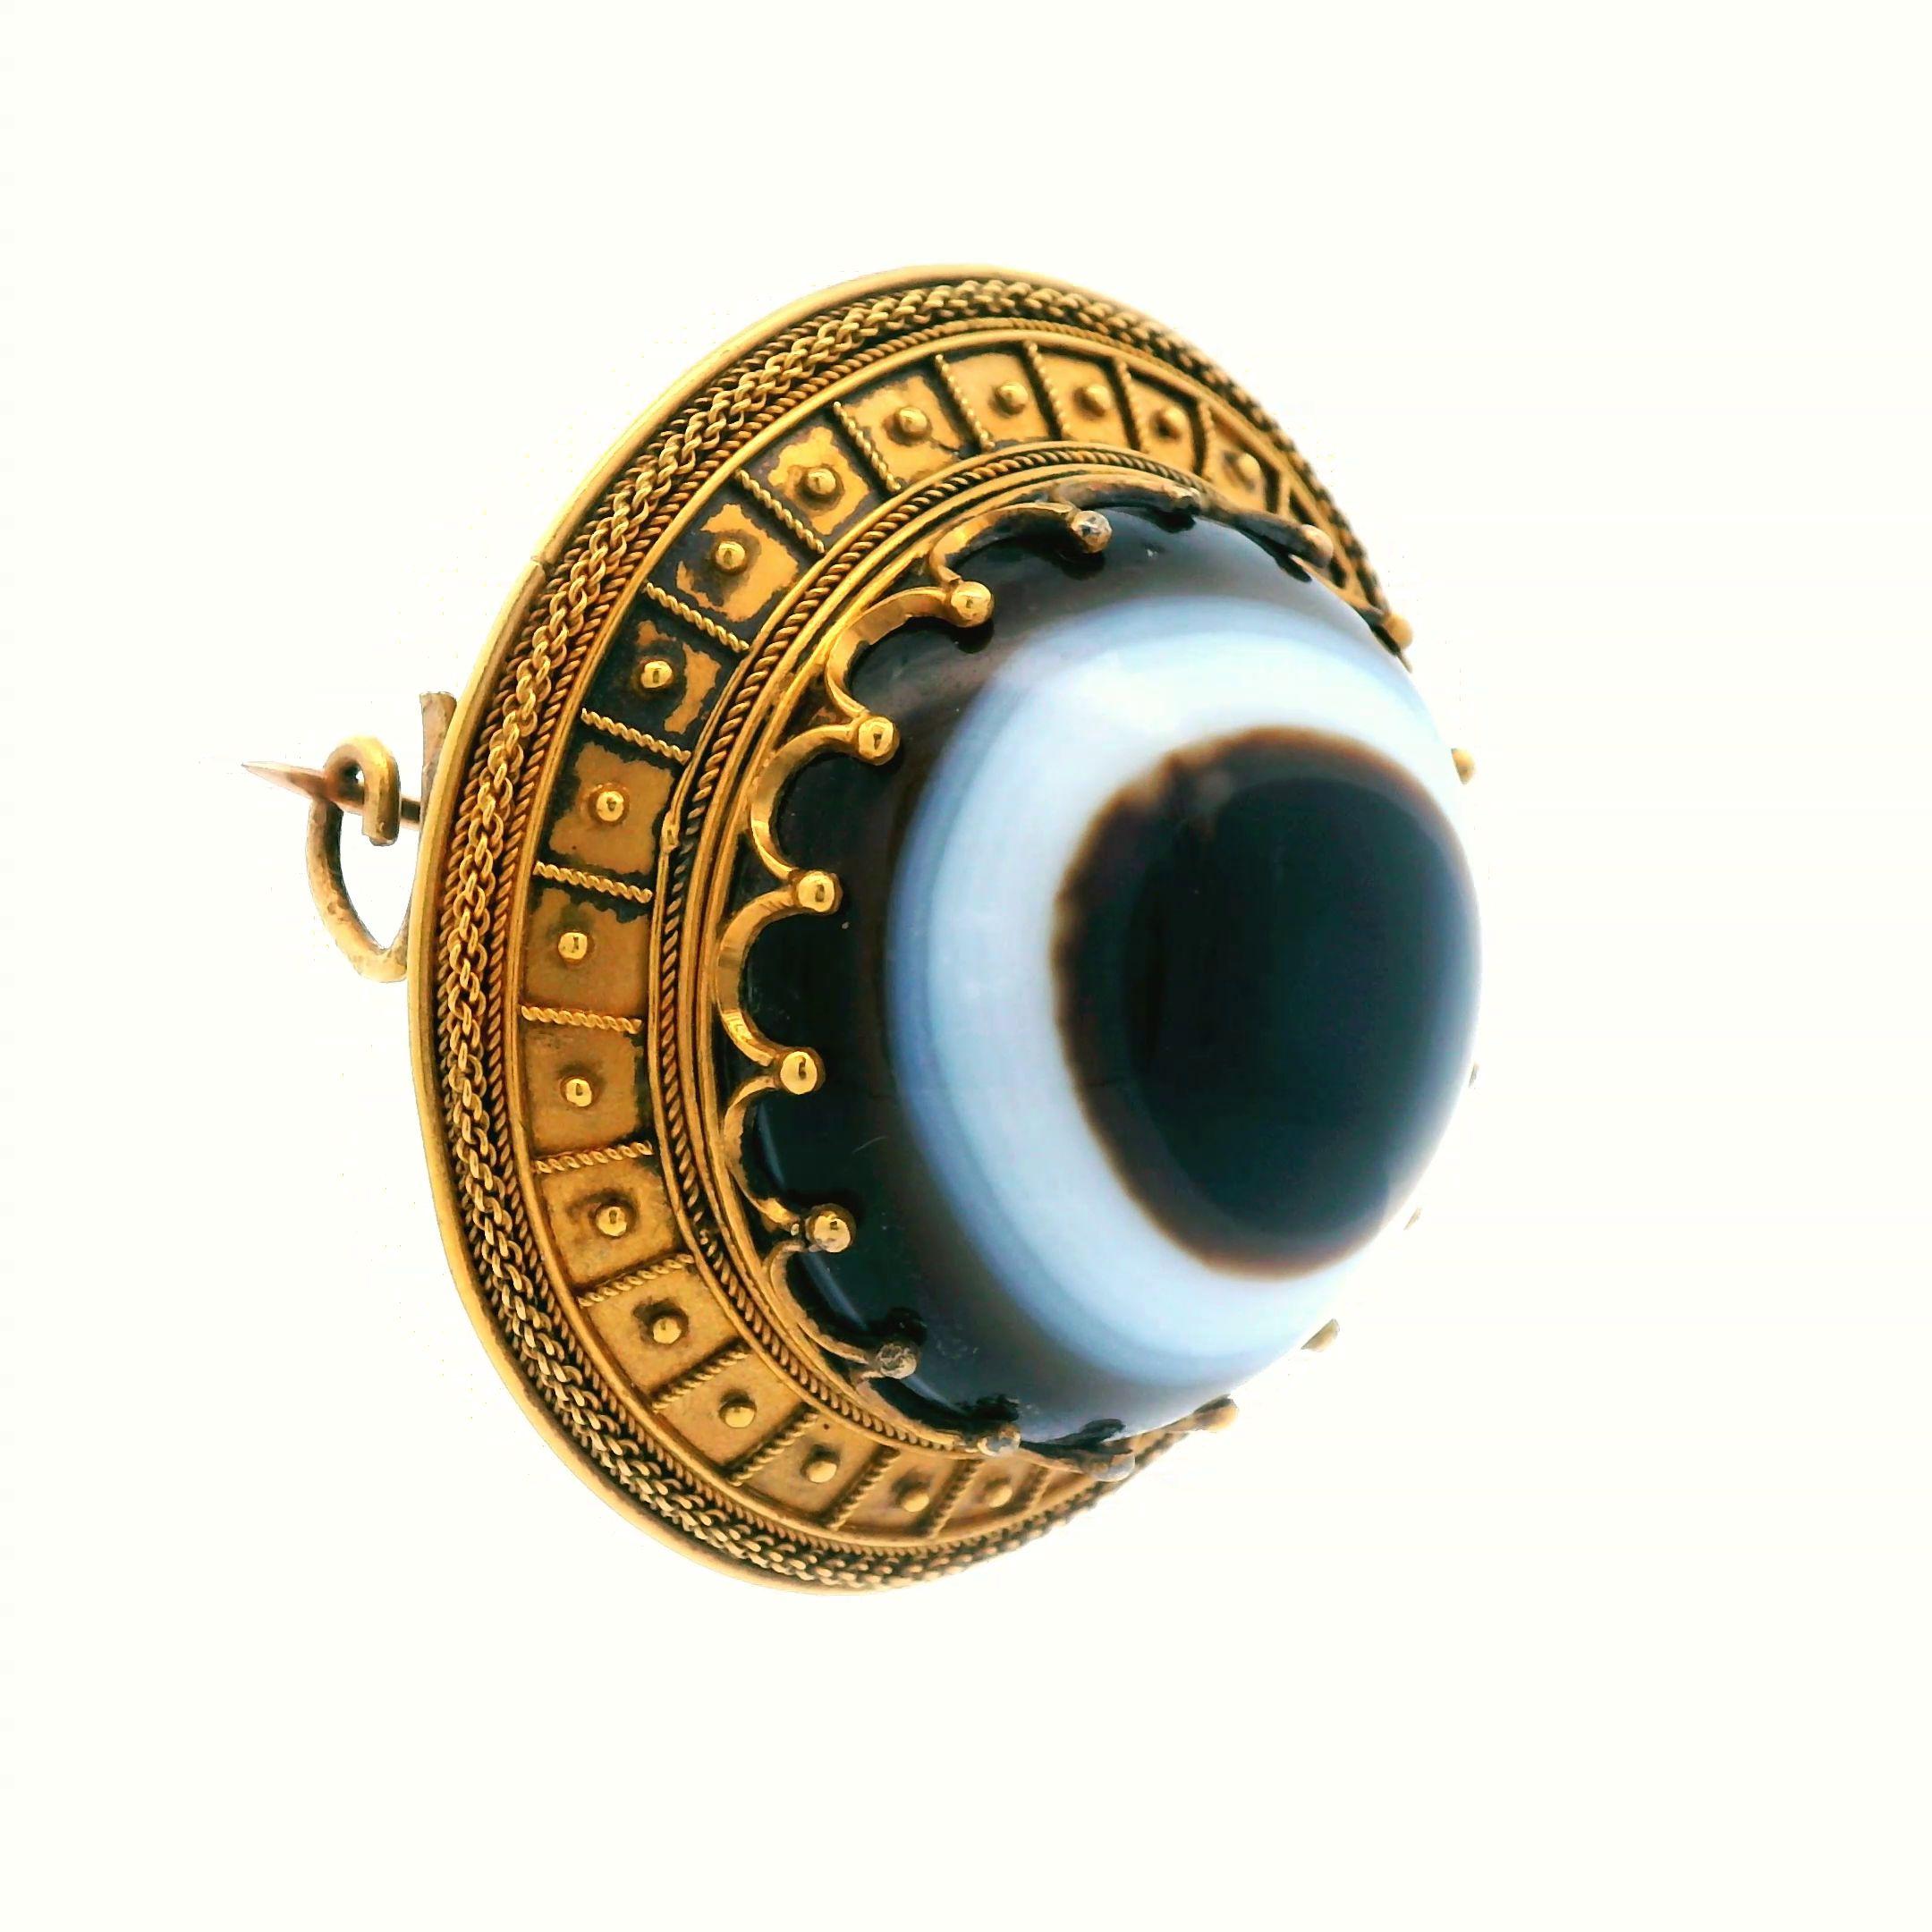 This lovely Victorian Etruscan pin is made in 18k yellow gold and features agate  EYE with a papal mark. The pin is 1.5 inches around and has a gram weight of 15.39 grams making this pin feel solid, yet still light weight enough to wear all day and